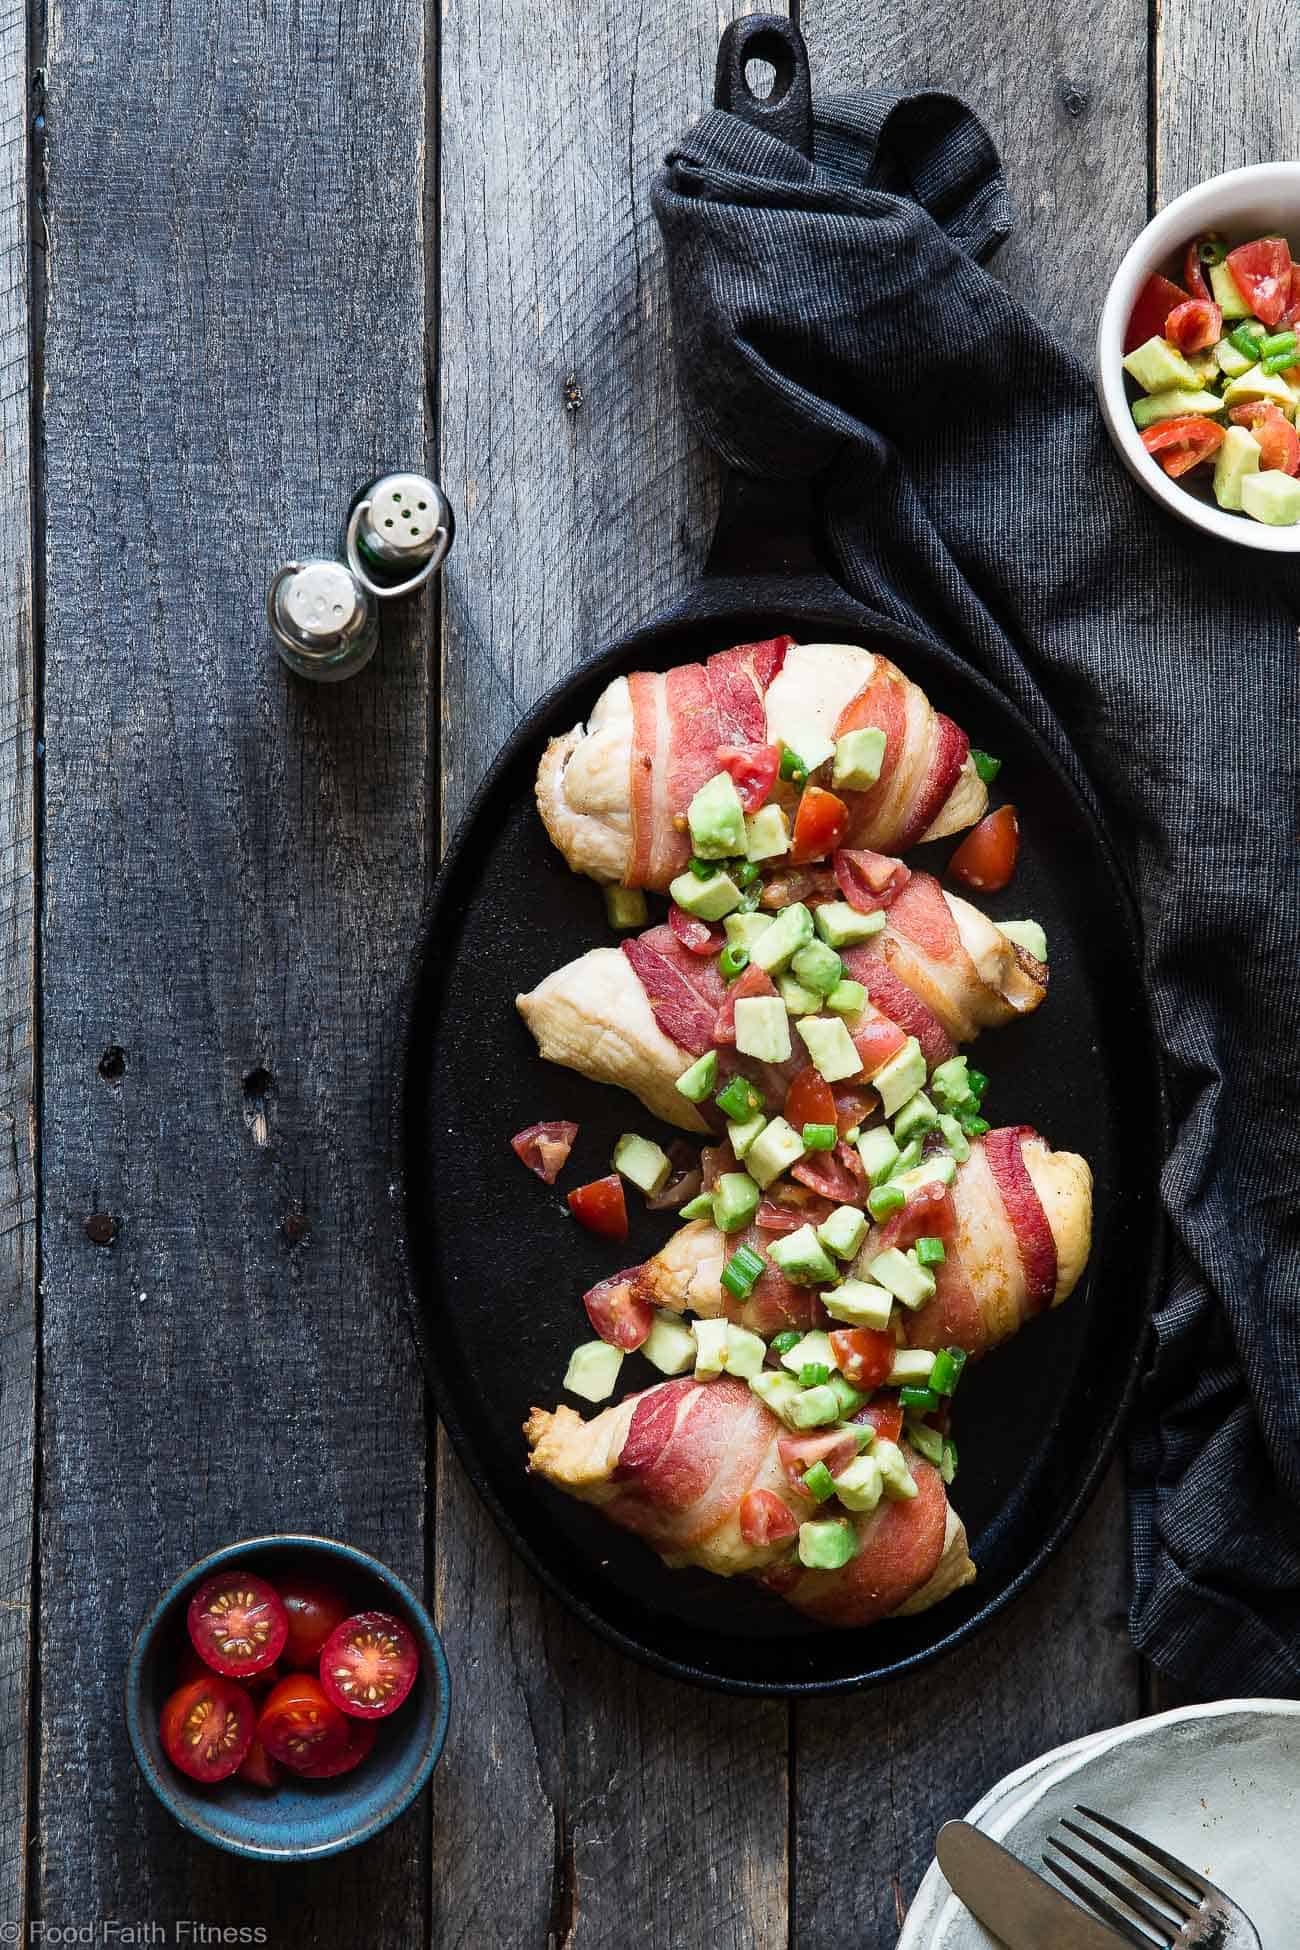 Whole30 Oven Baked Bacon Wrapped Chicken Breast - This chicken wrapped in bacon has a CREAMY, addicting avocado salsa, this is one quick and easy, kid friendly dinner that's paleo, keto and whole30 compliant! | Foodfaithfitness.com | @FoodFaithFit